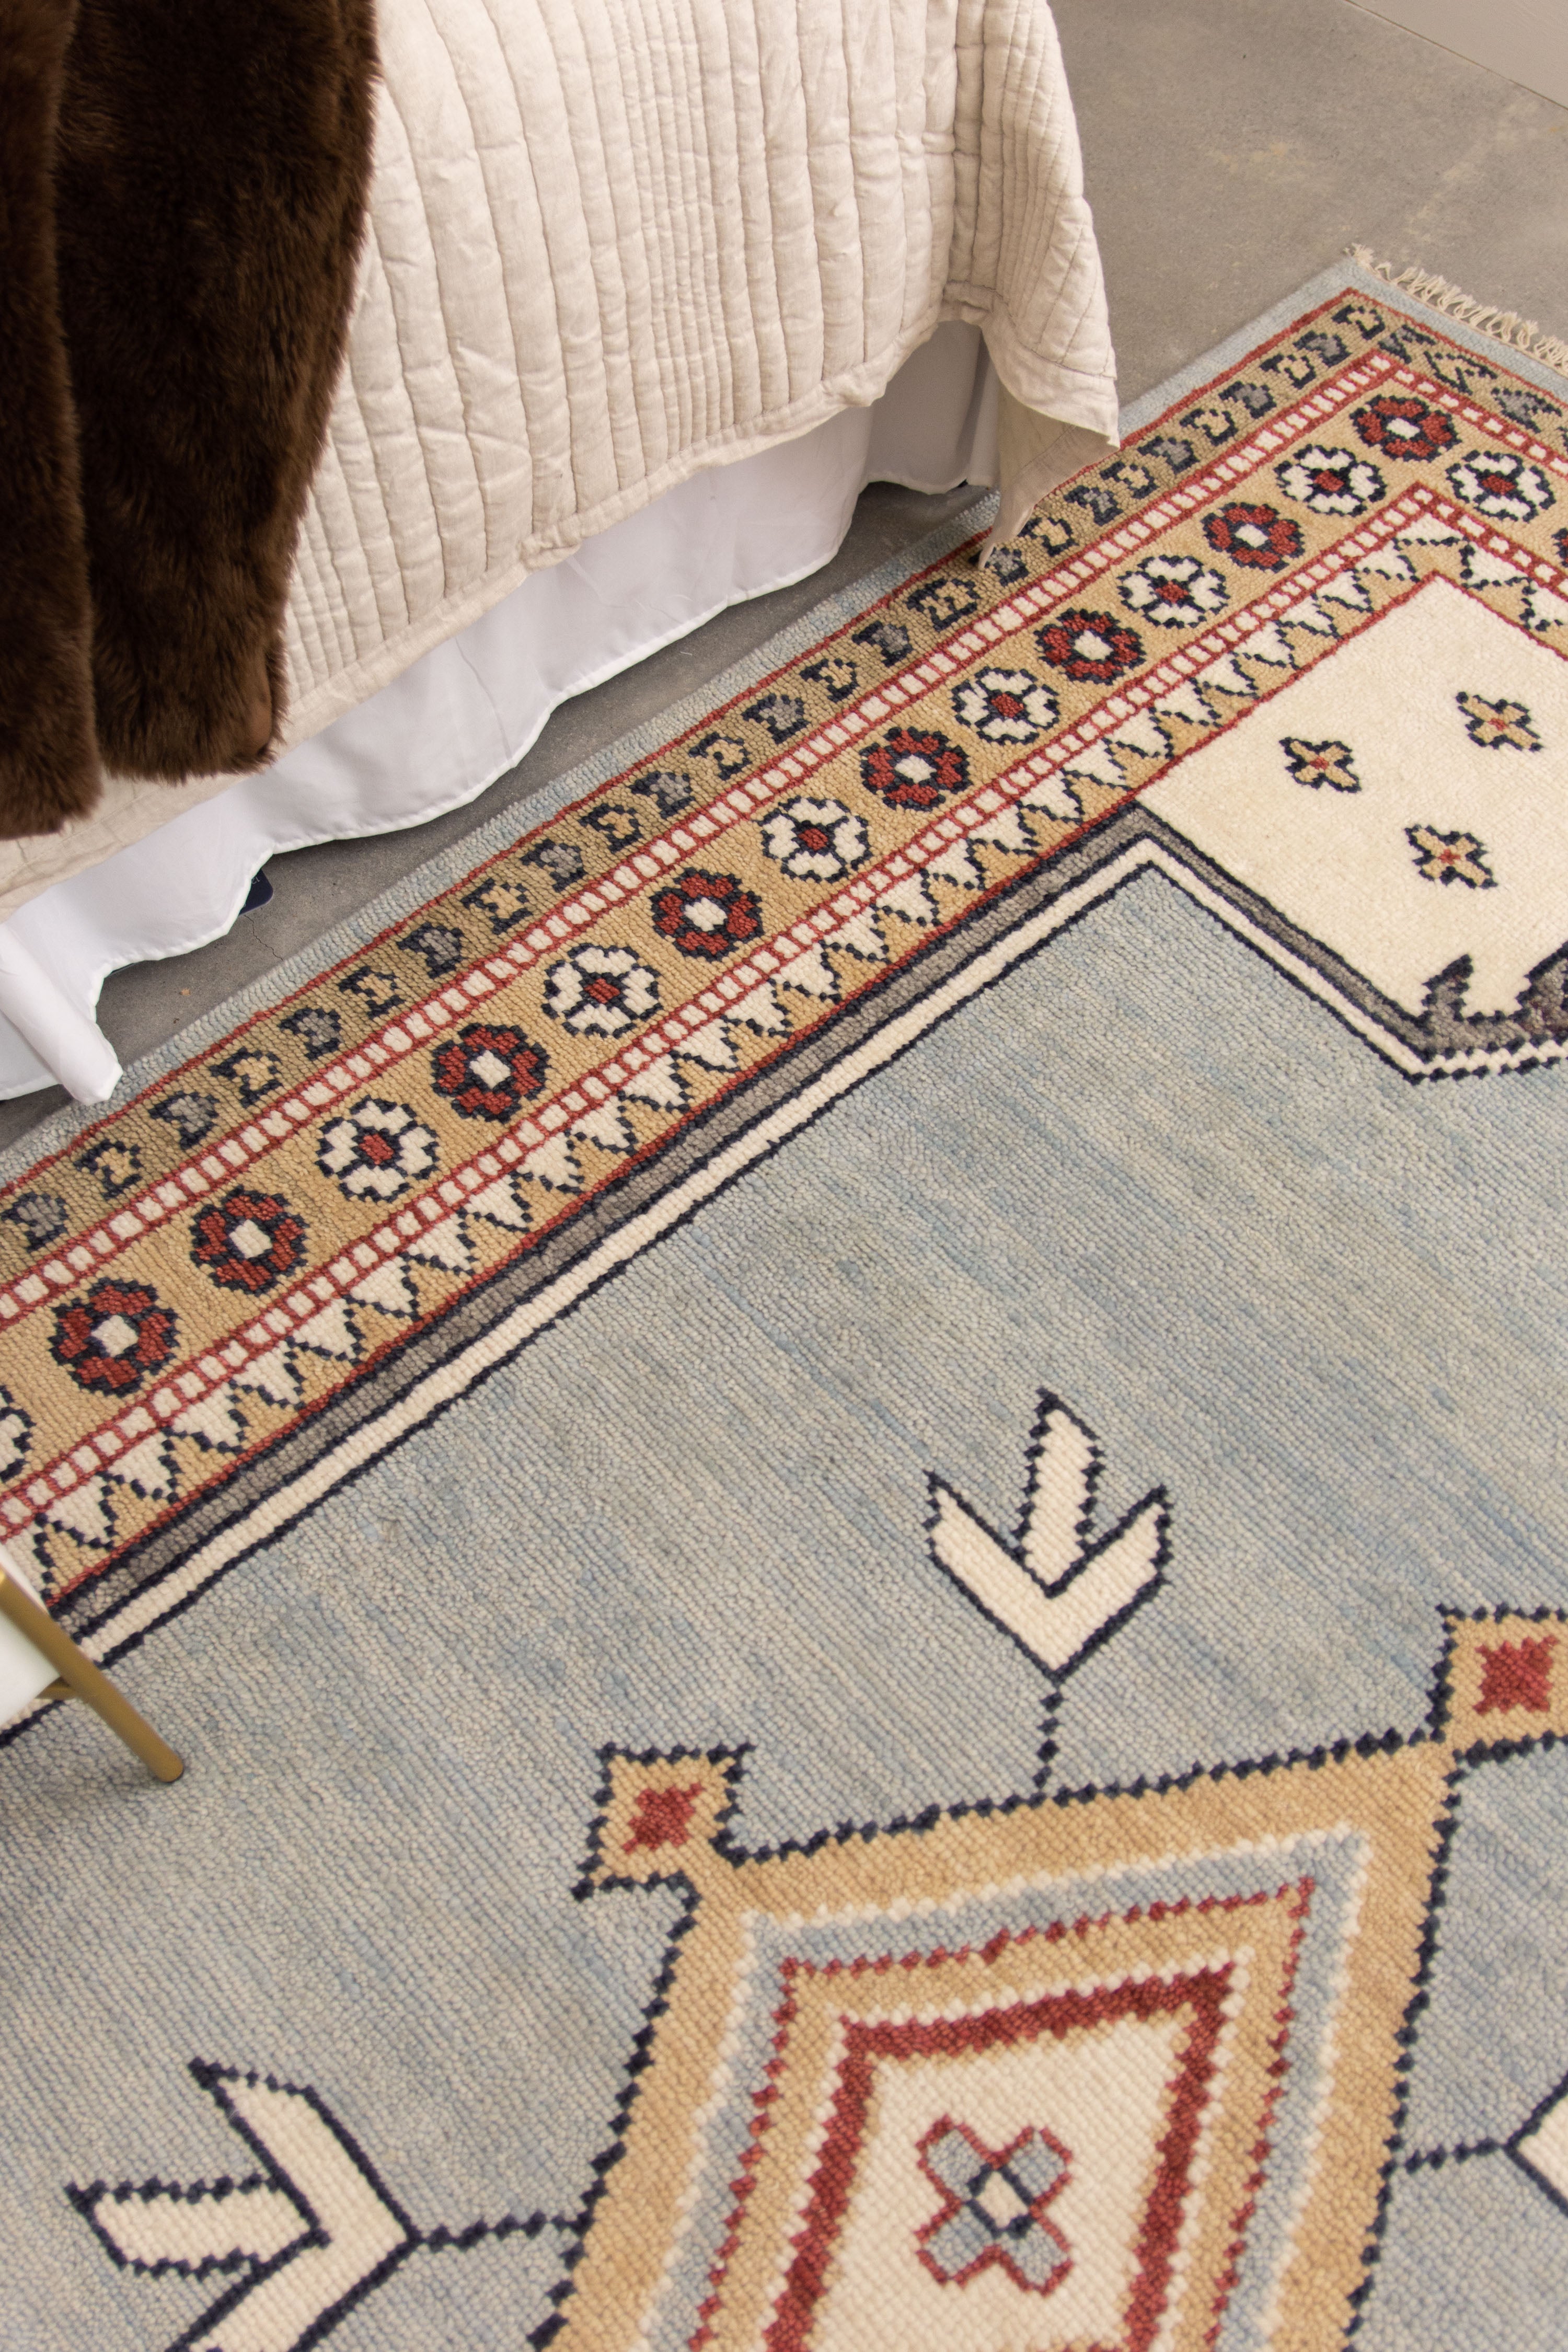 Discover The Different Types of Rugs And Their Benefits